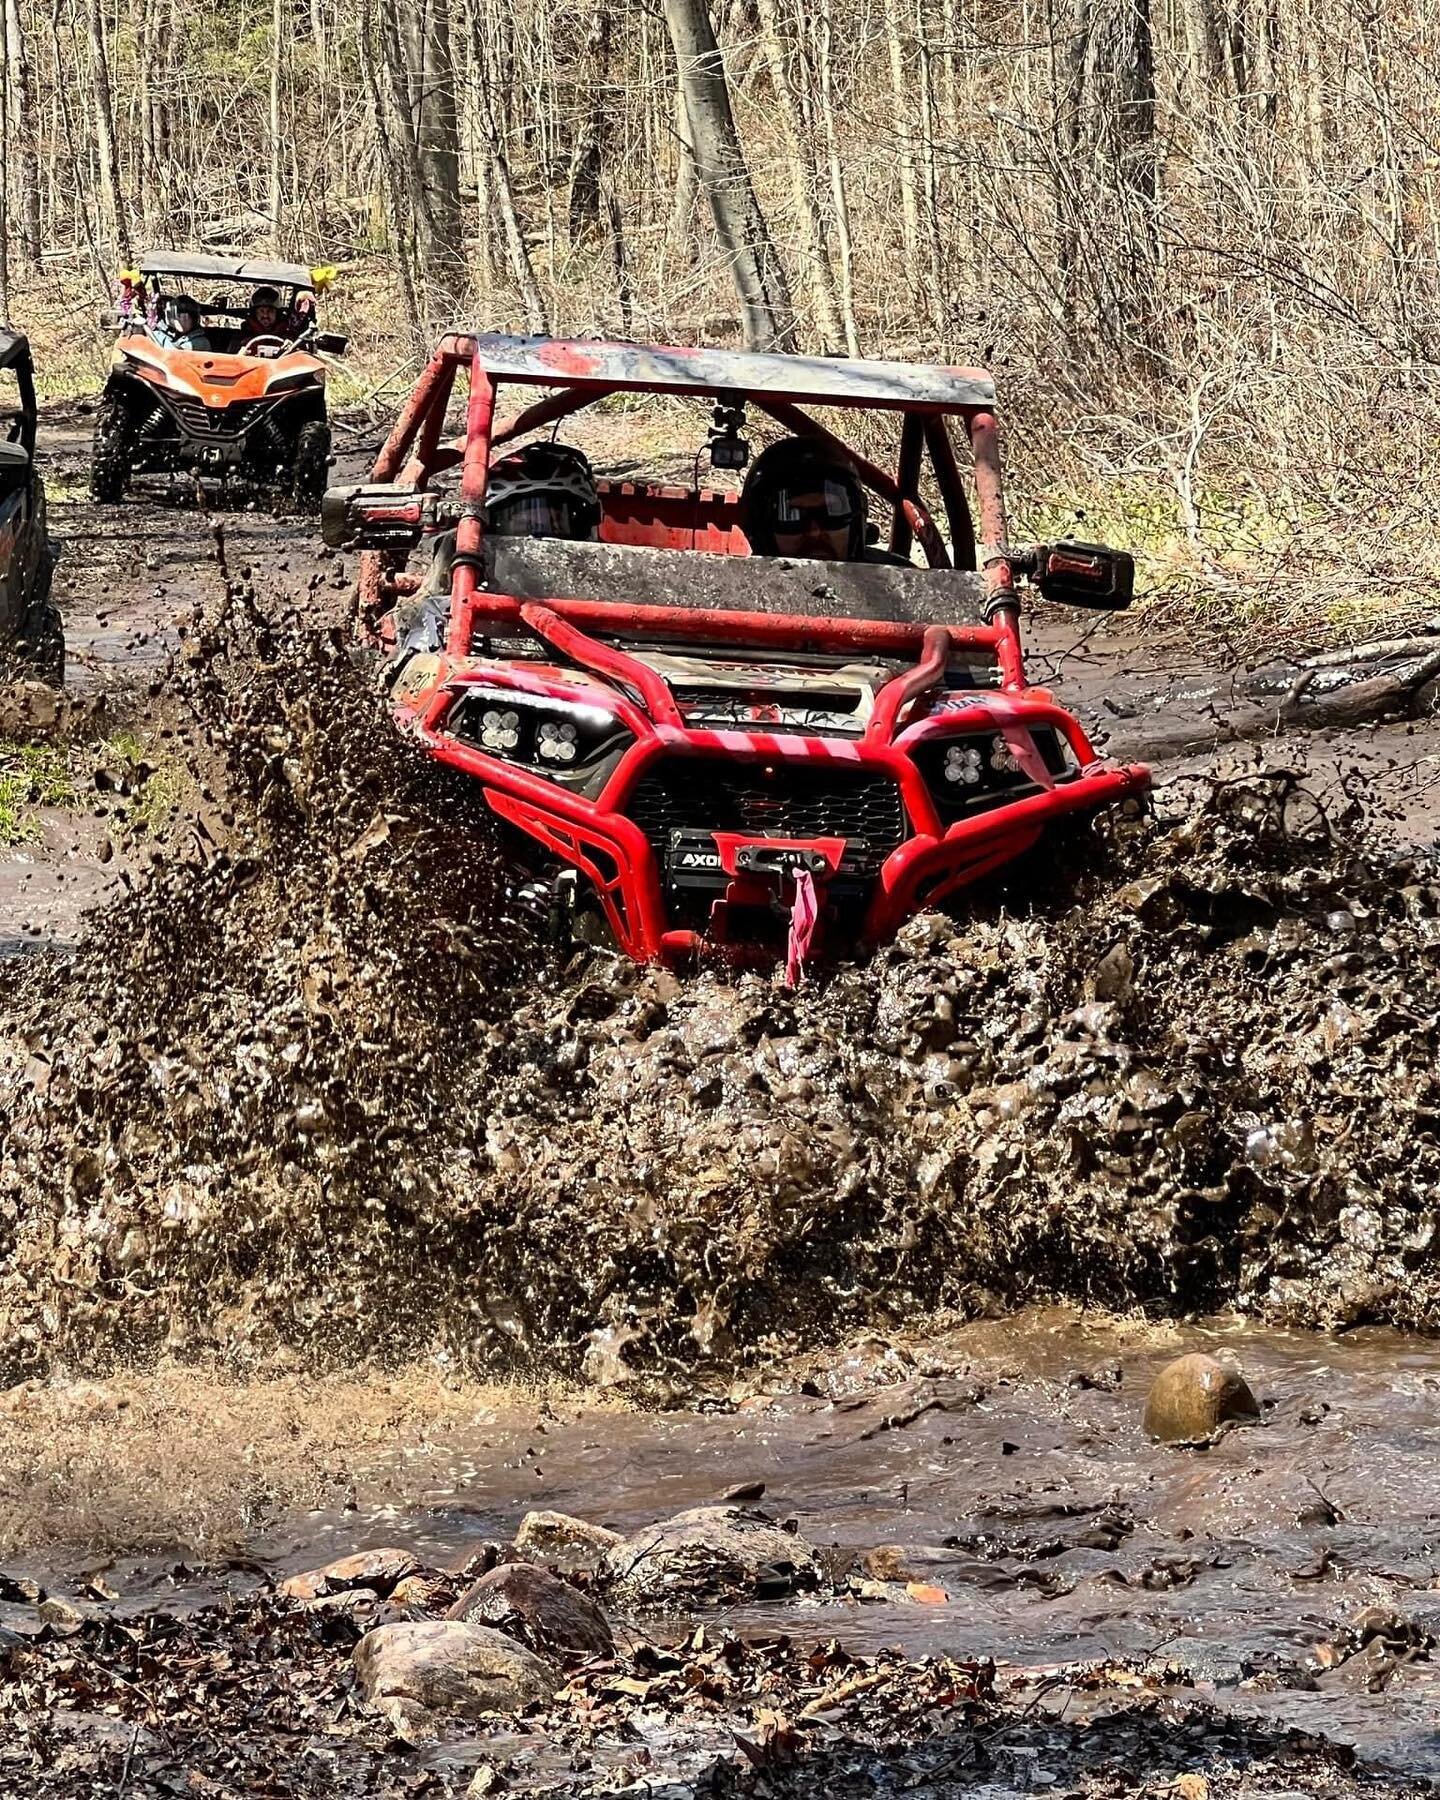 We had an awesome and sloppy time at the 13th annual TRAX4 Breast Cancer charity ride hosted by the @kellyshiresbreastcancer foundation at the @grandtappattooresort in Parry Sound Ontario this weekend! Loads of great people, awesome machines and deep